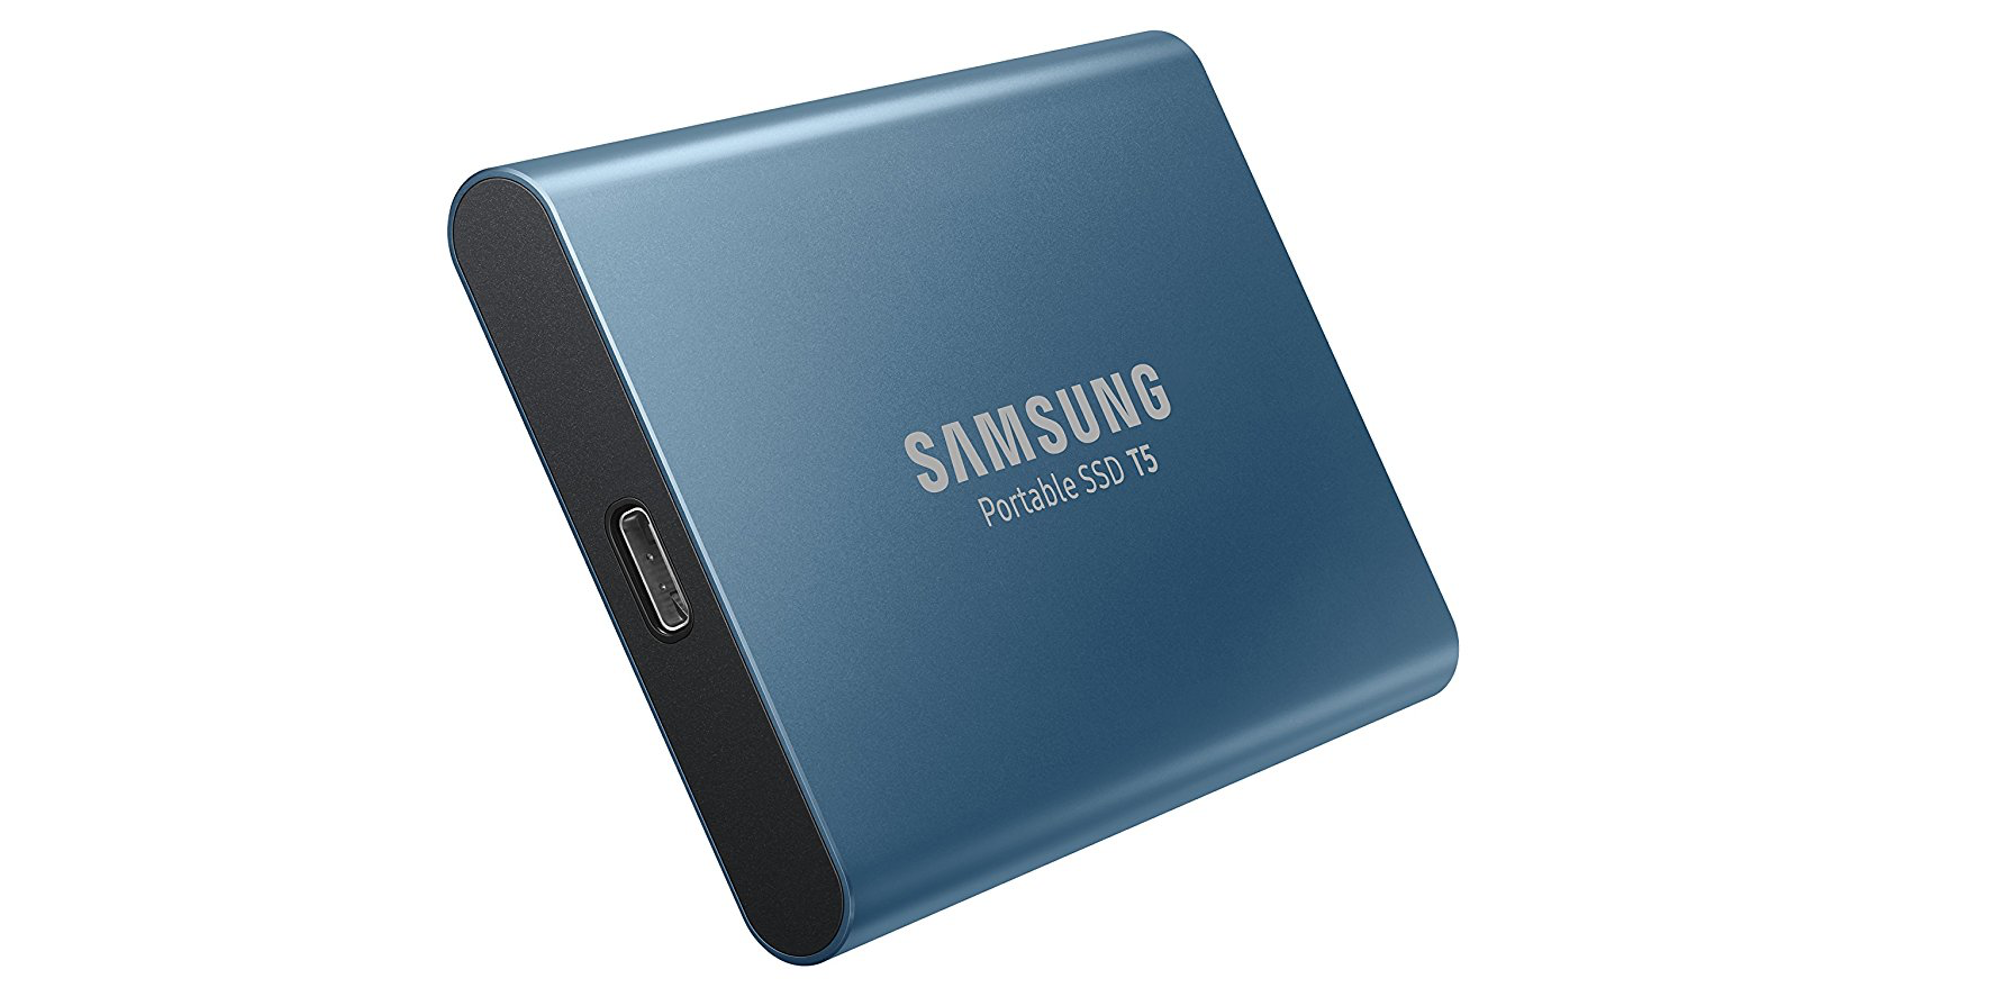 Samsung's Portable 250GB USB 3.1 SSD returns to Amazon all-time at $100